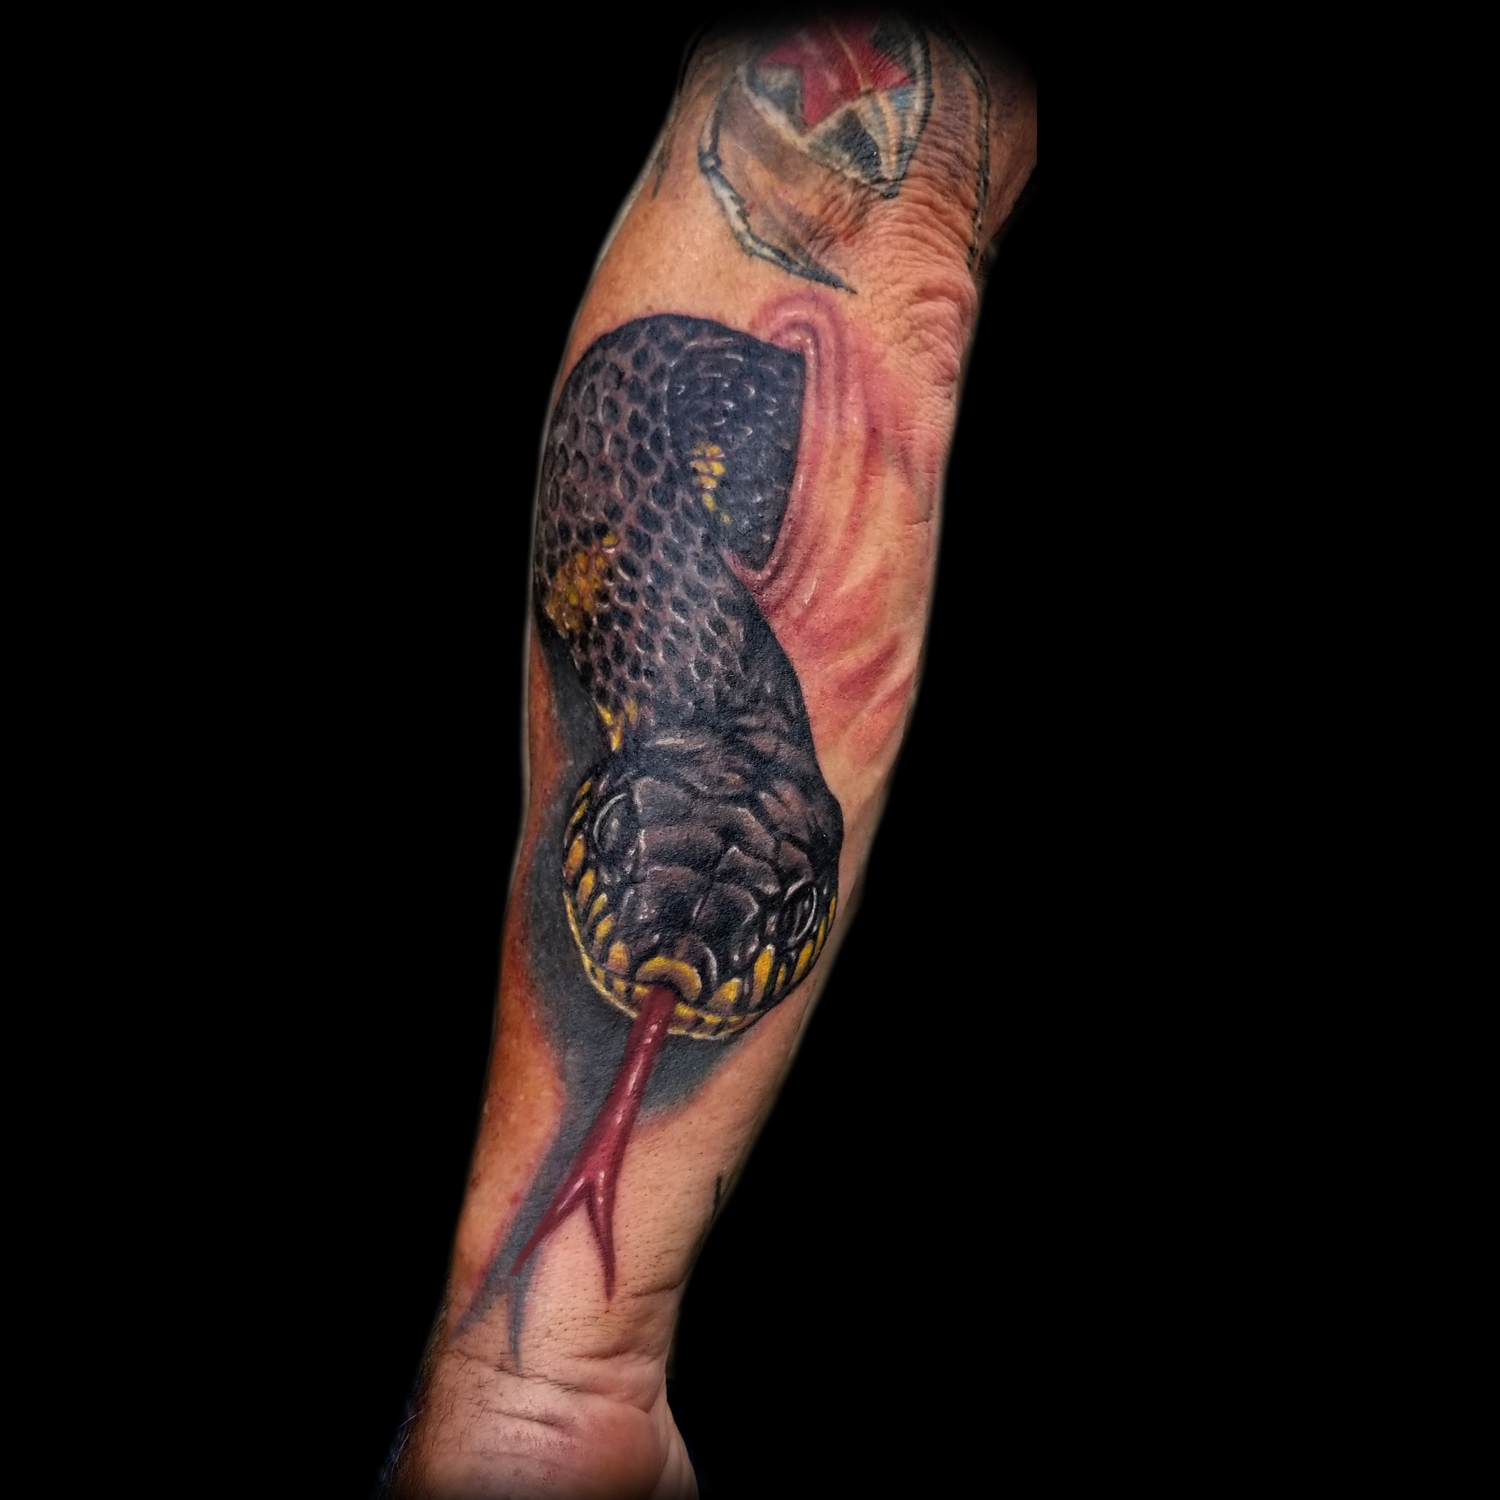 181 Tattooz Studio - 3D Tattoo of a snake on collar bone hope you guys  loved it. If you are looking for any 3D tattoo designs just walk into our  studio with